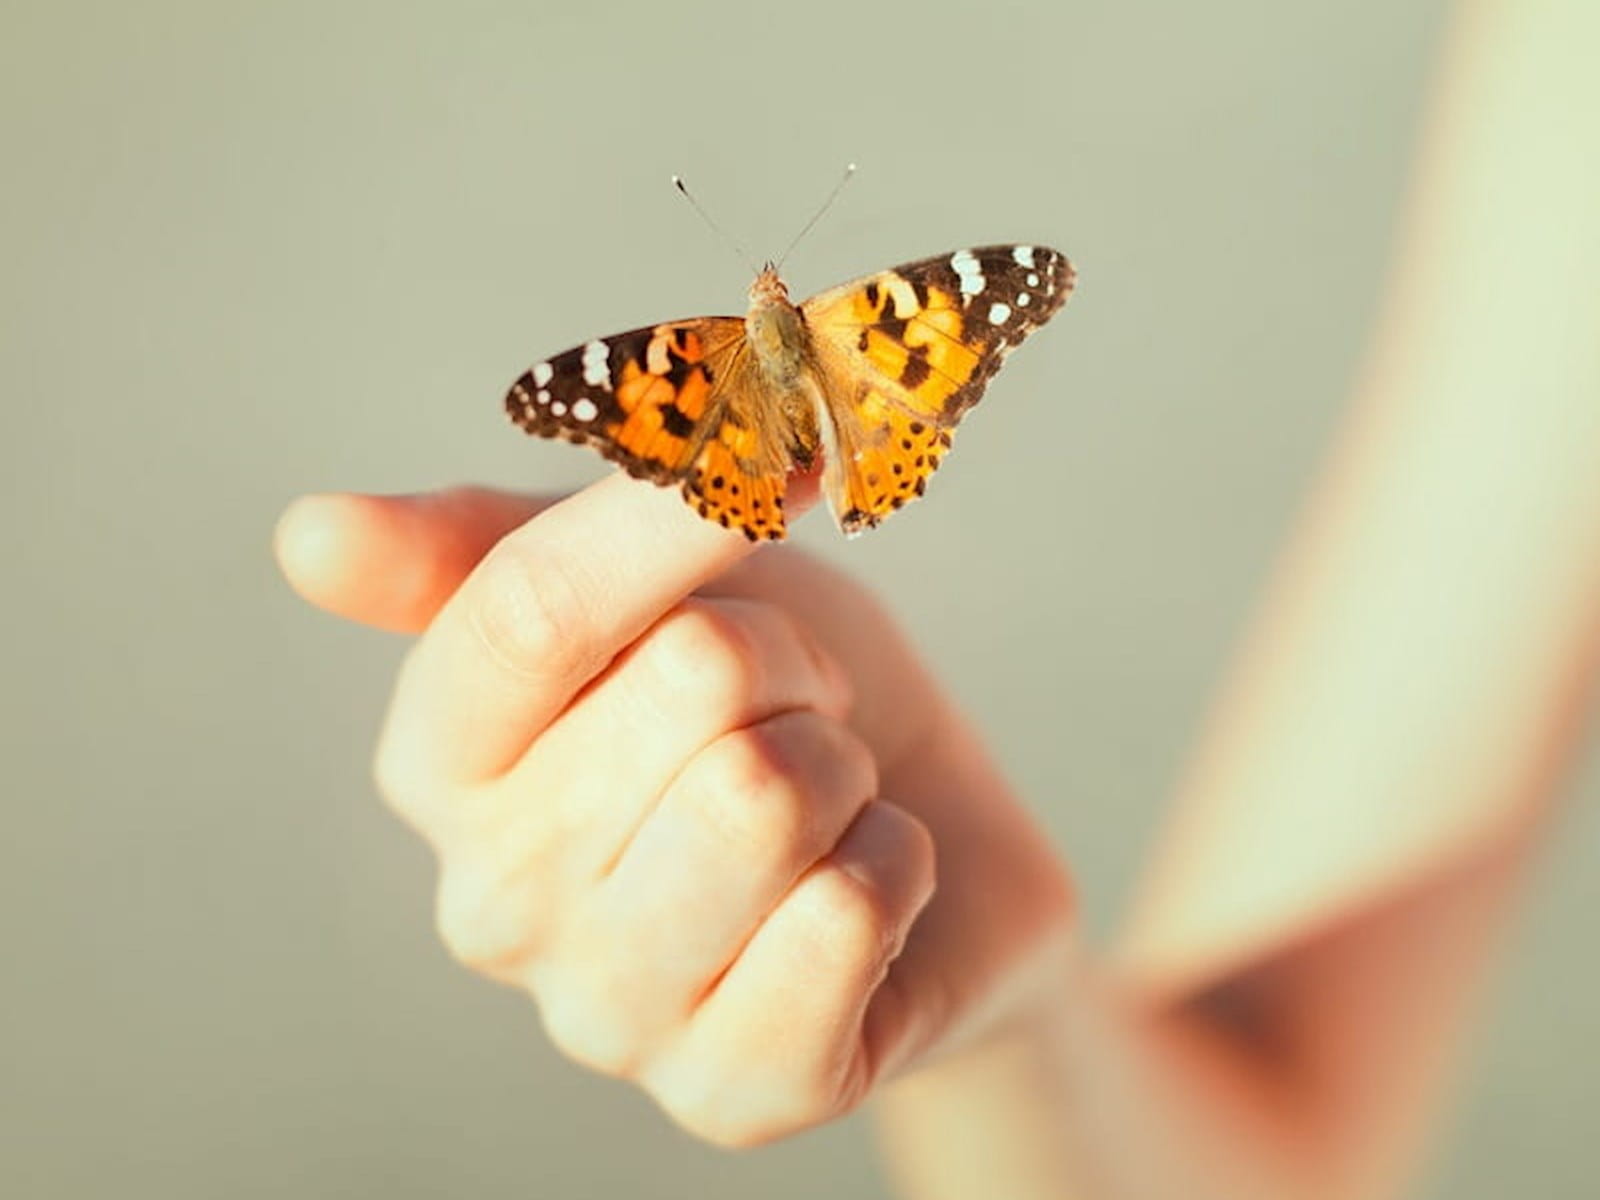 Butterfly resting on a hand